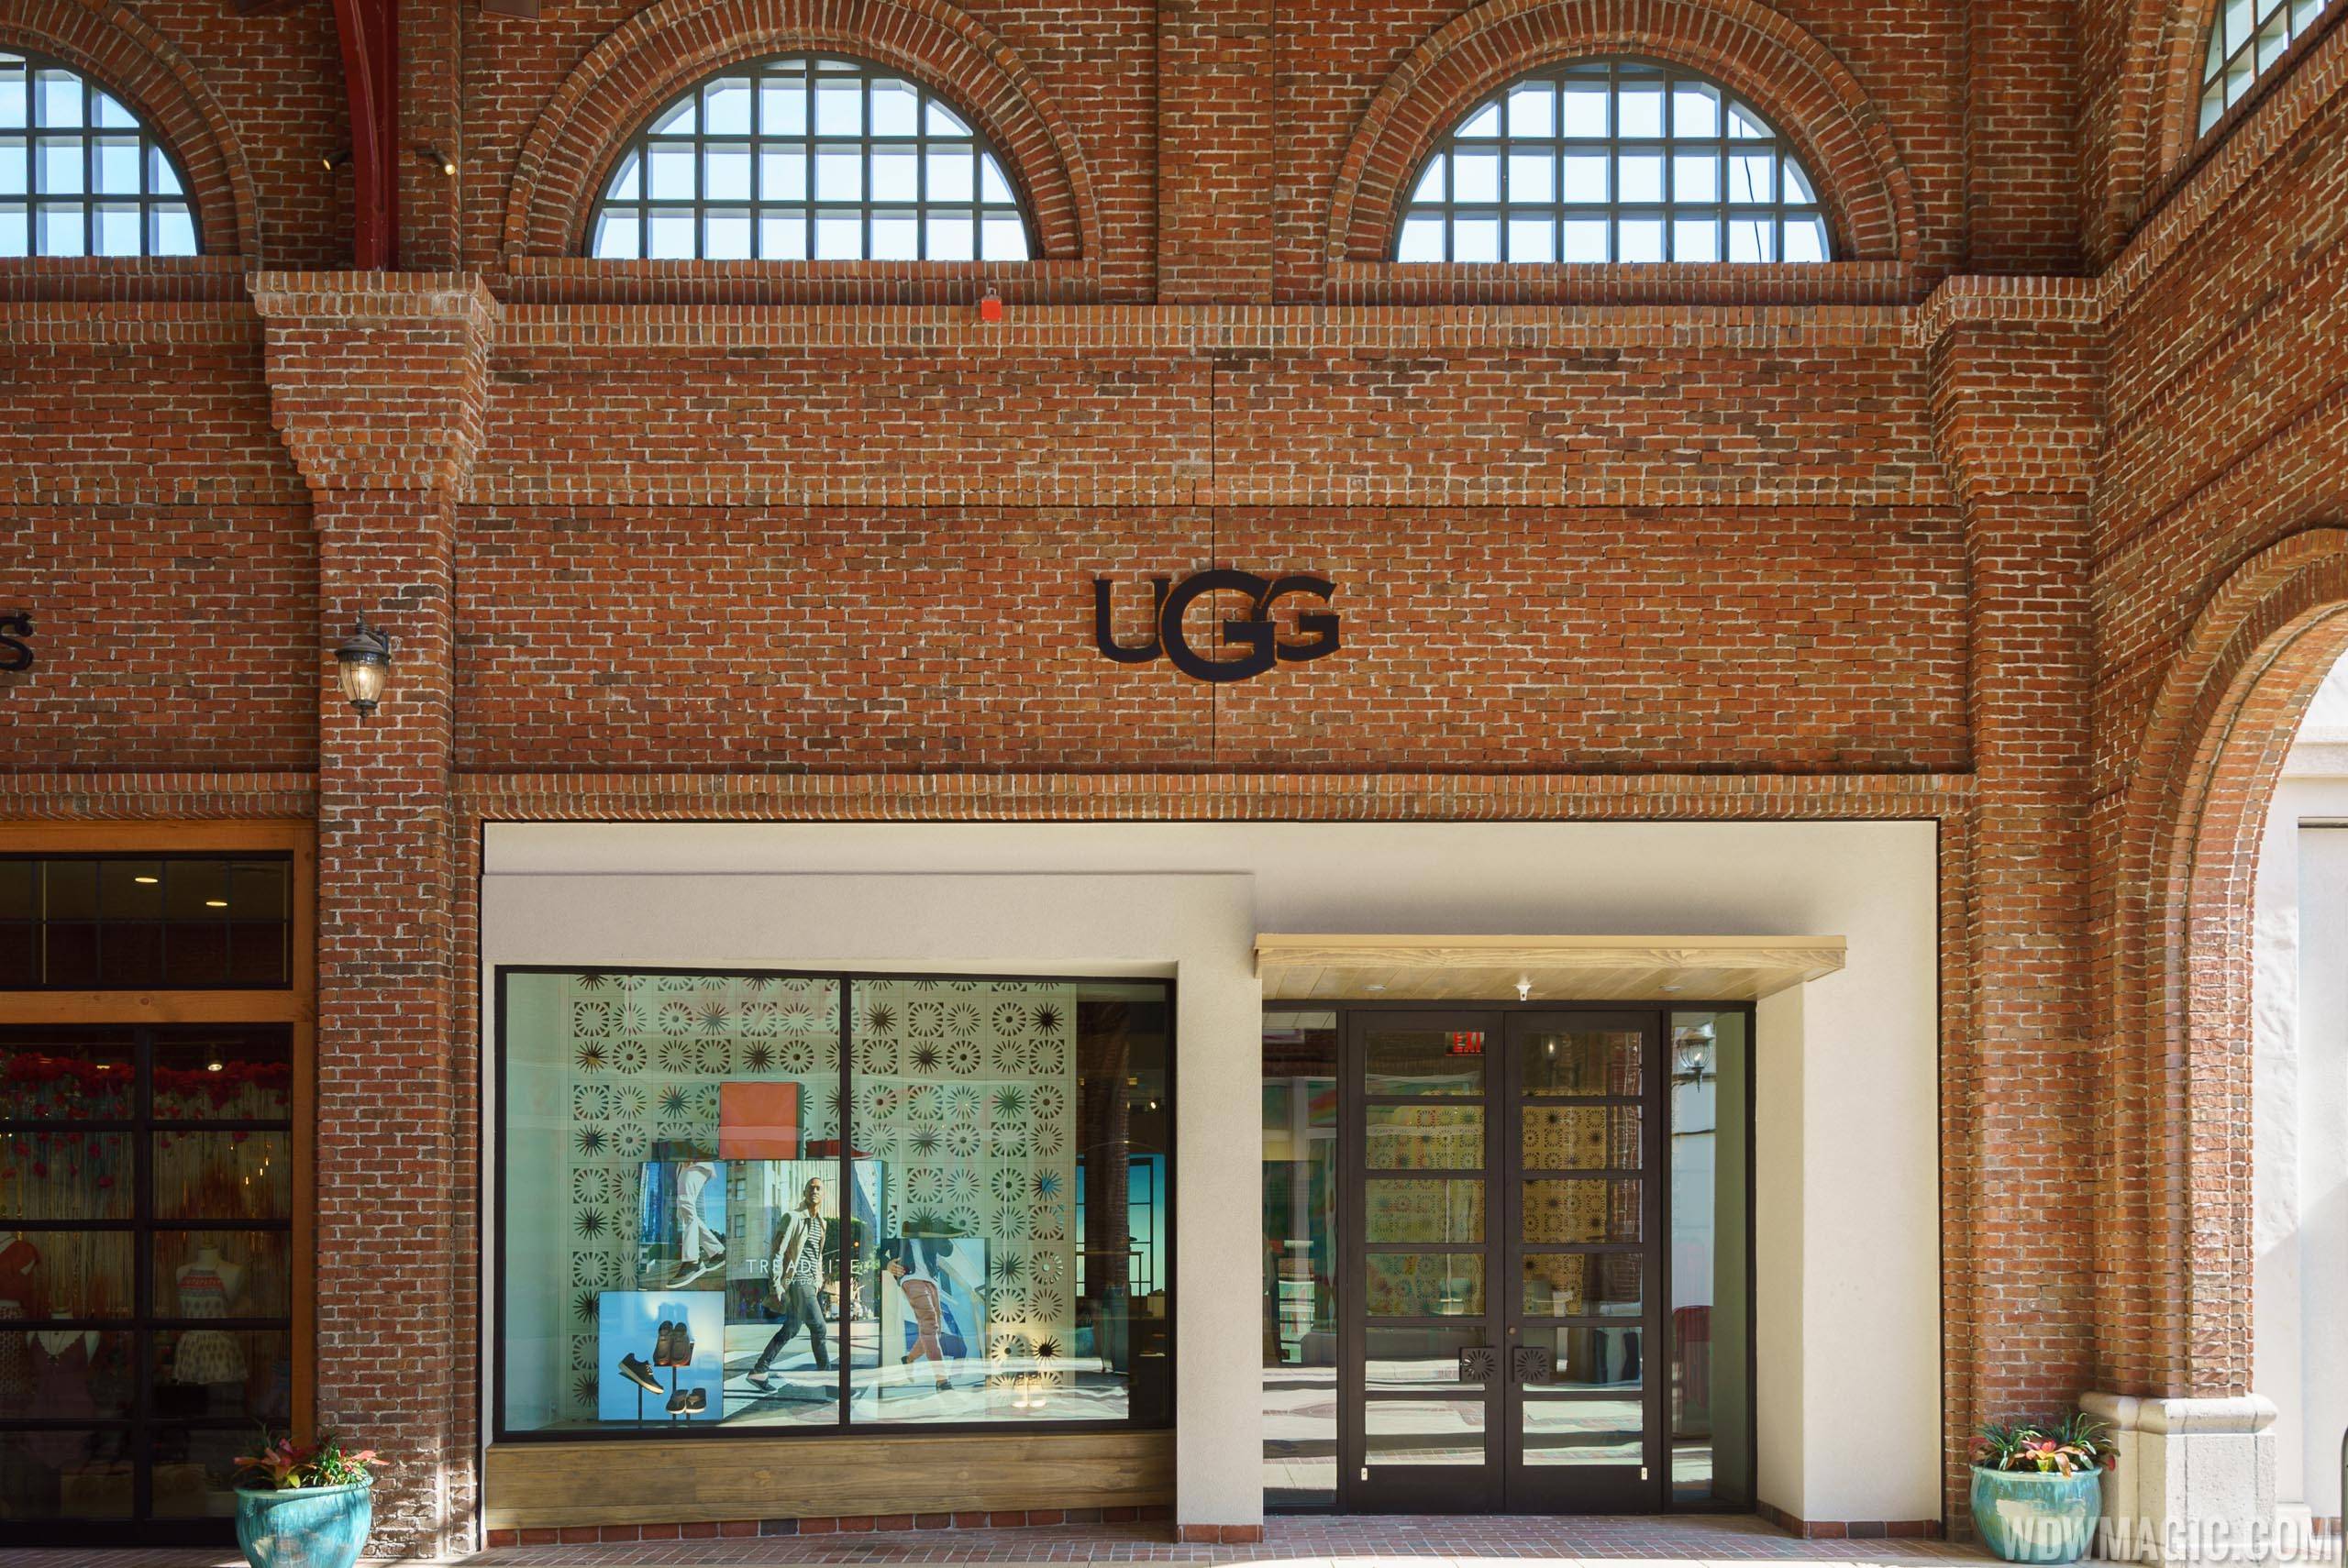 UGG at Disney Springs - Store front